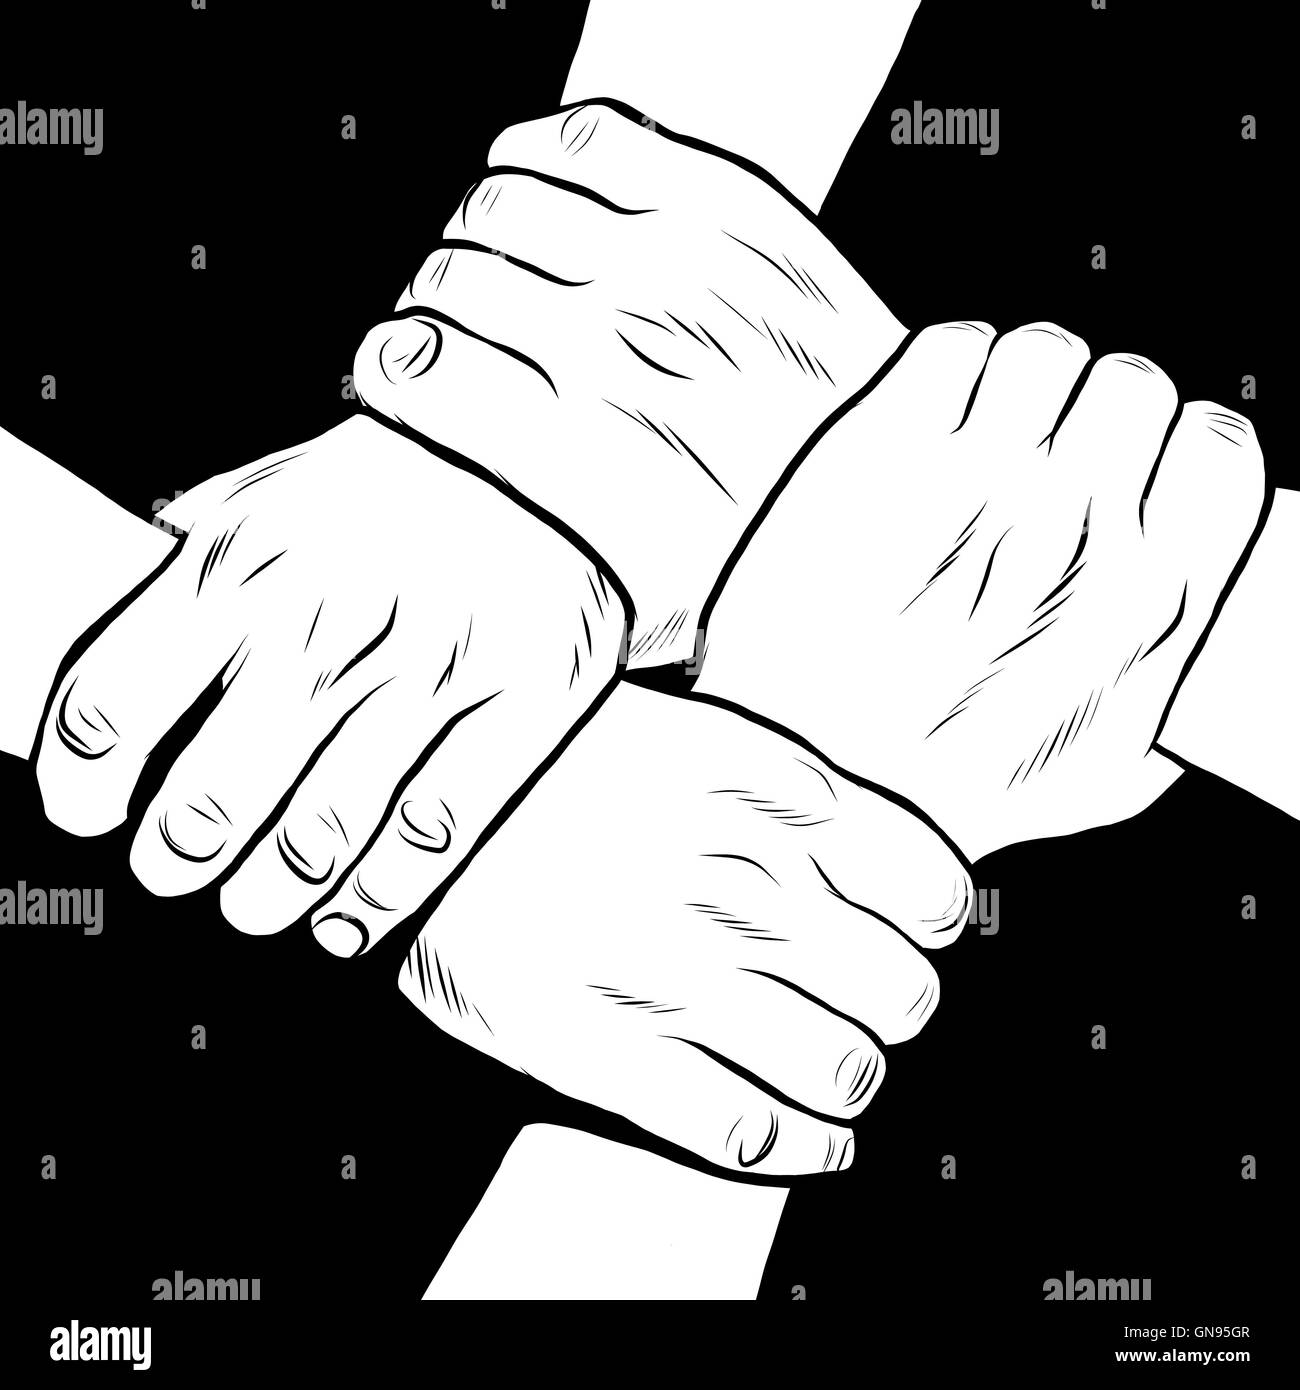 Black and white hands solidarity friendship Stock Vector